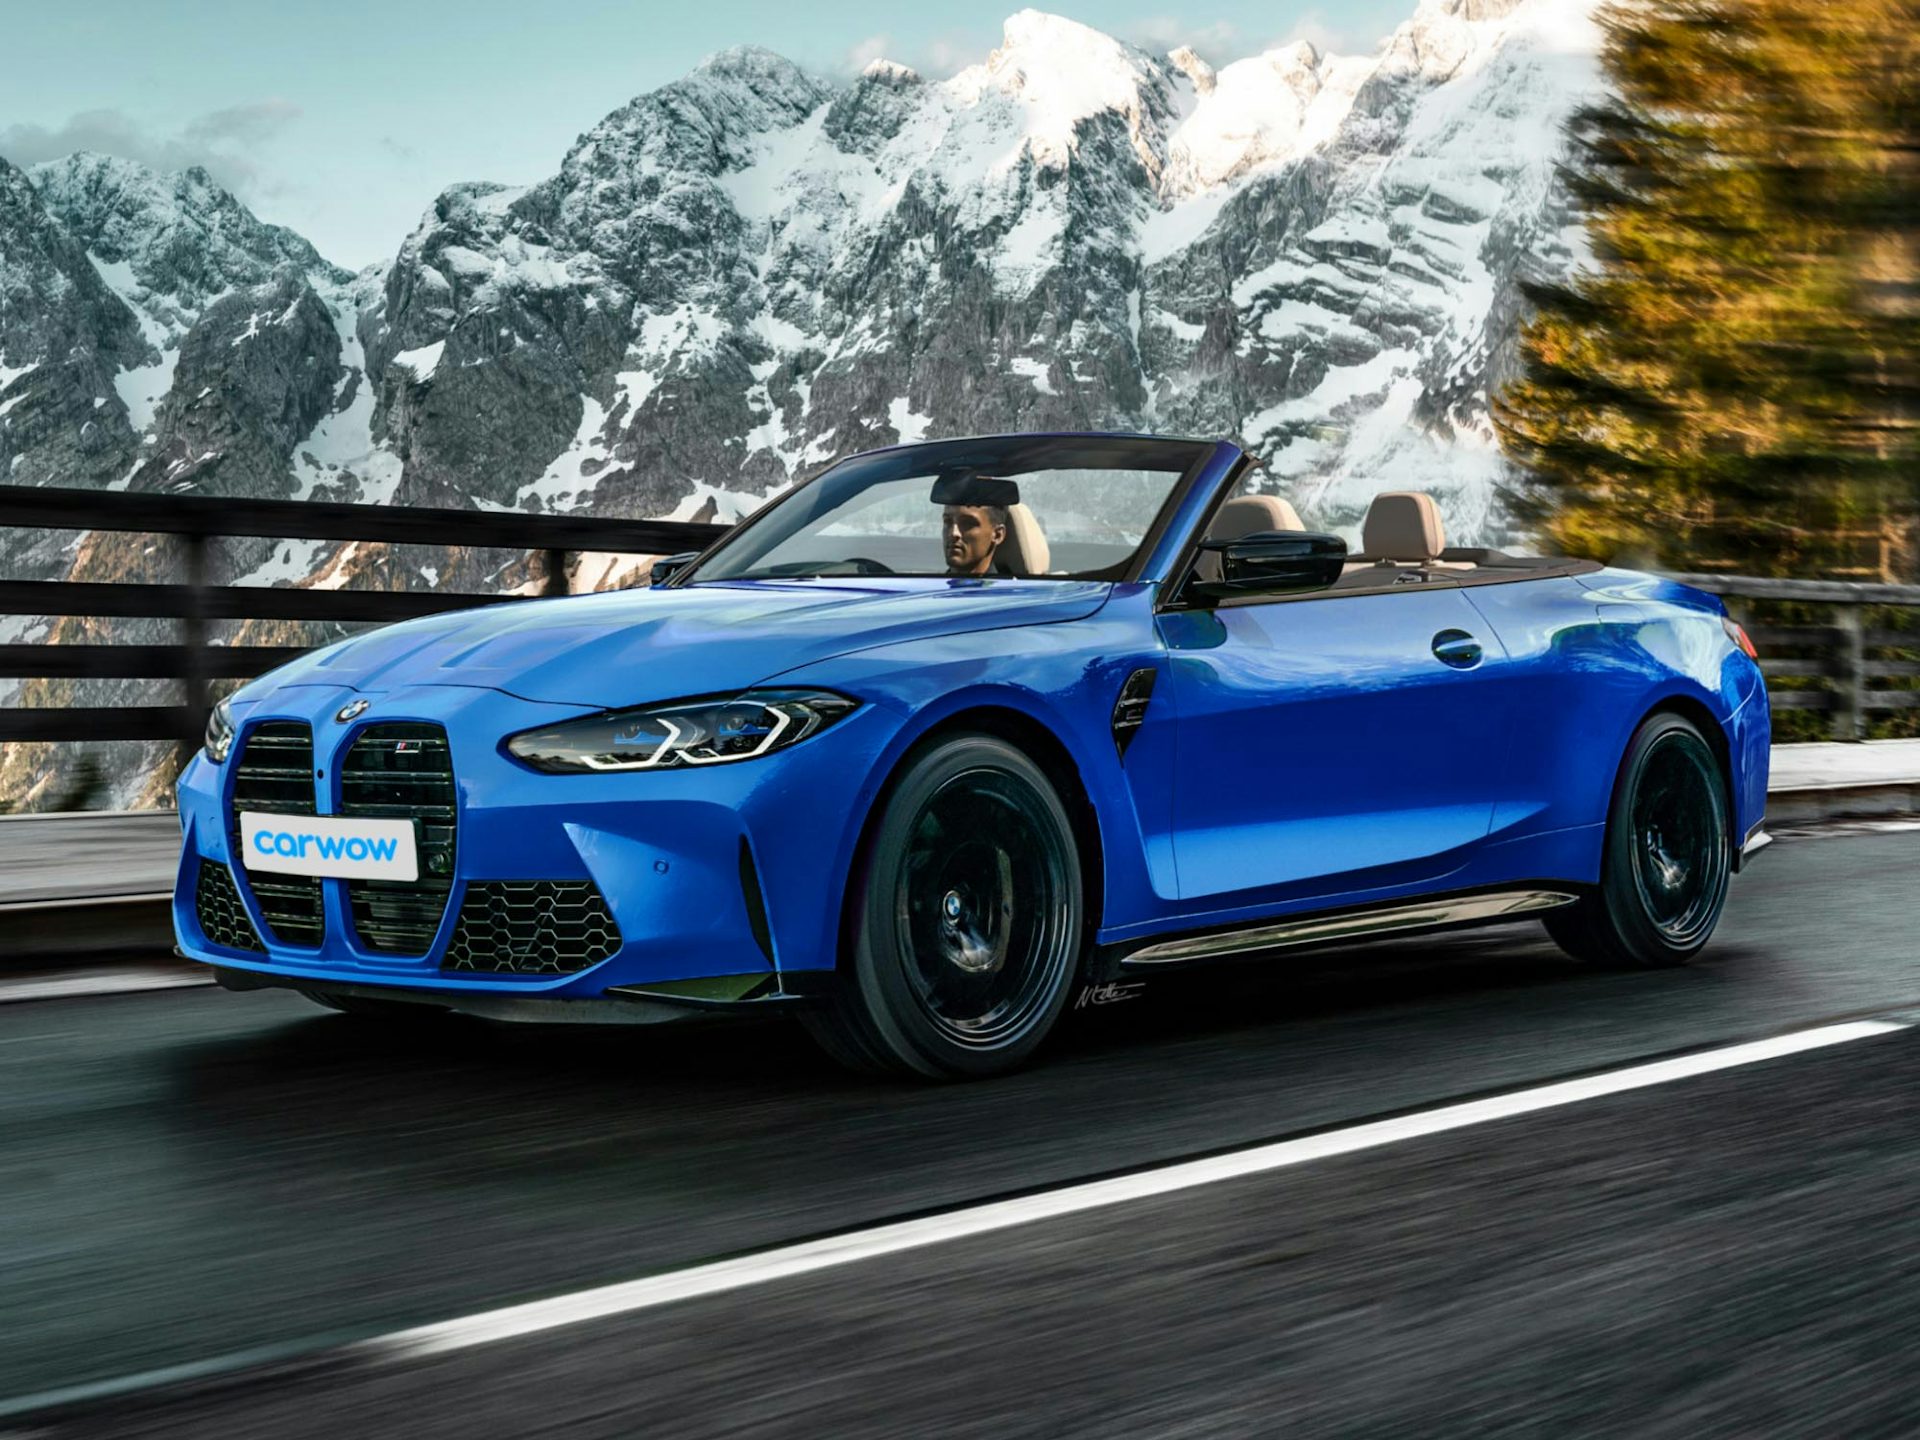 2021 BMW M4 Convertible revealed in exclusive render: price, specs and